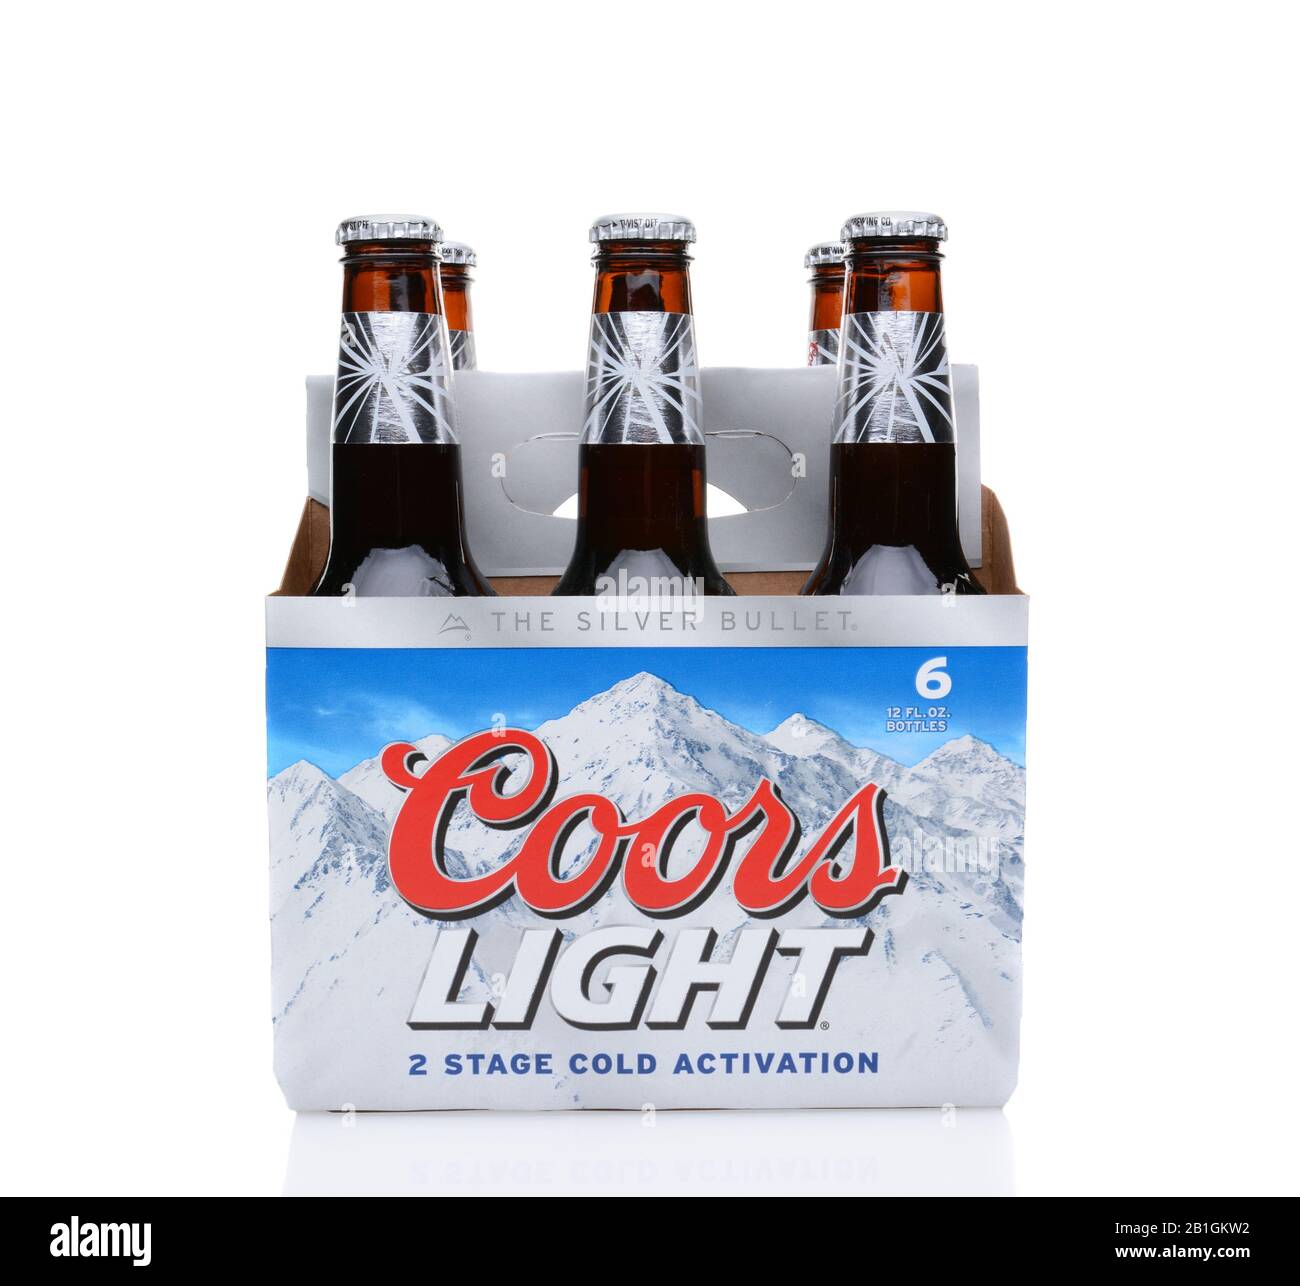 IRVINE, CA - MAY 25, 2014: A 6 pack of Coors Light Beer. Coors operates a brewery in Golden, Colorado, that is the largest single brewery facility in Stock Photo